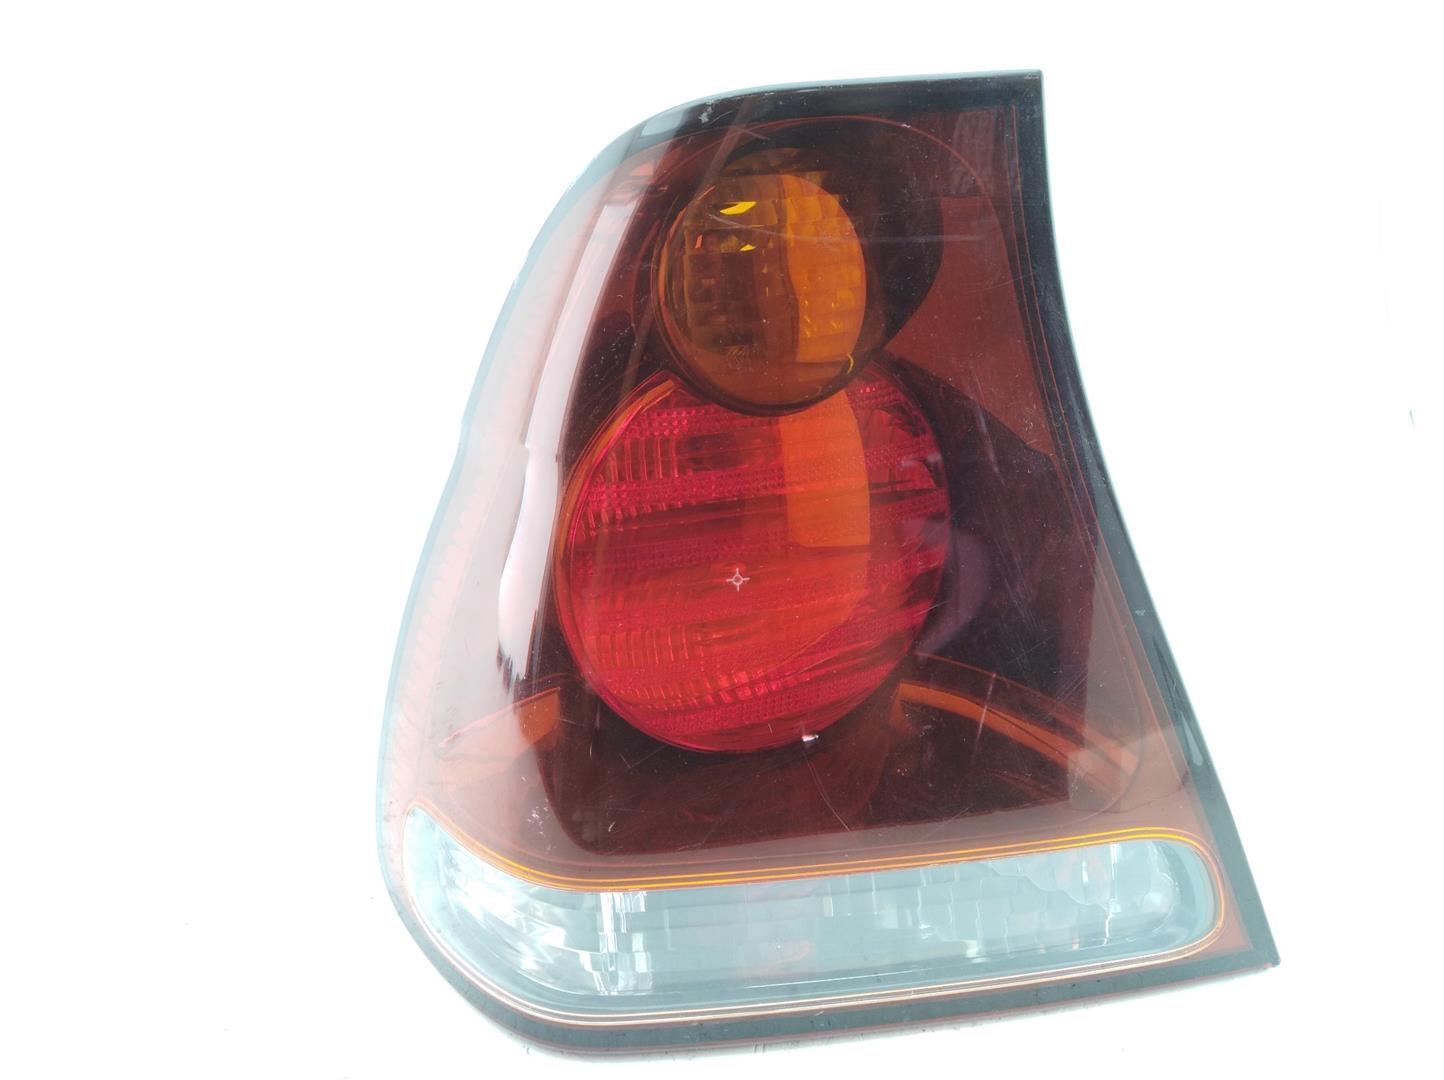 BMW 3 Series E46 (1997-2006) Rear Left Taillight 63216934161, 63216934161, 63216934161 24667748